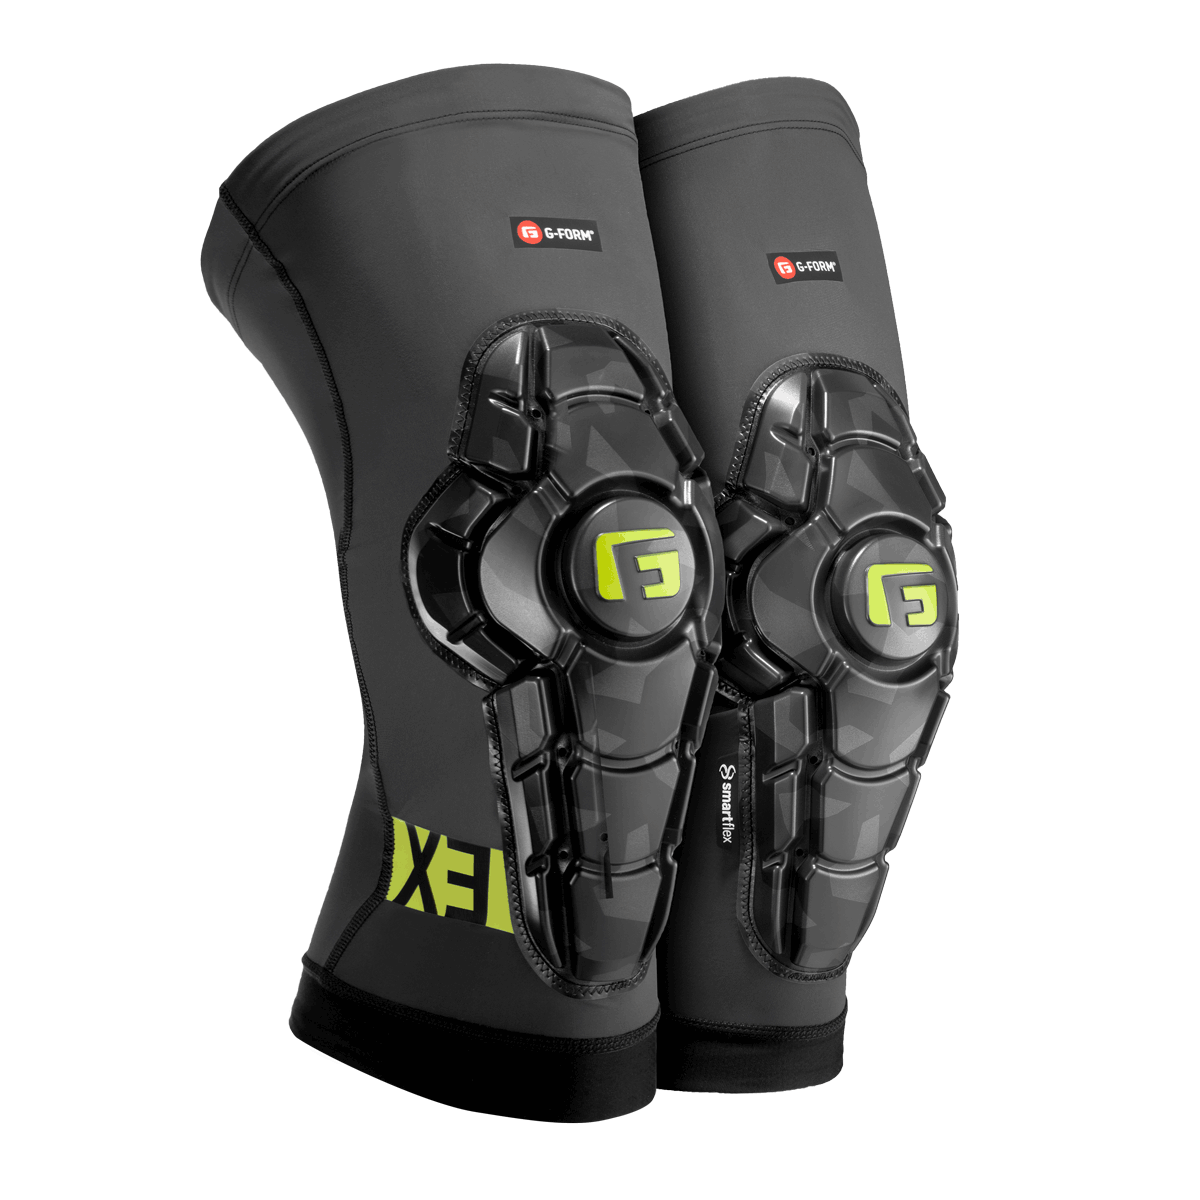 G-Form – Leightweight Knee & Elbow Guards & other Protective Gear